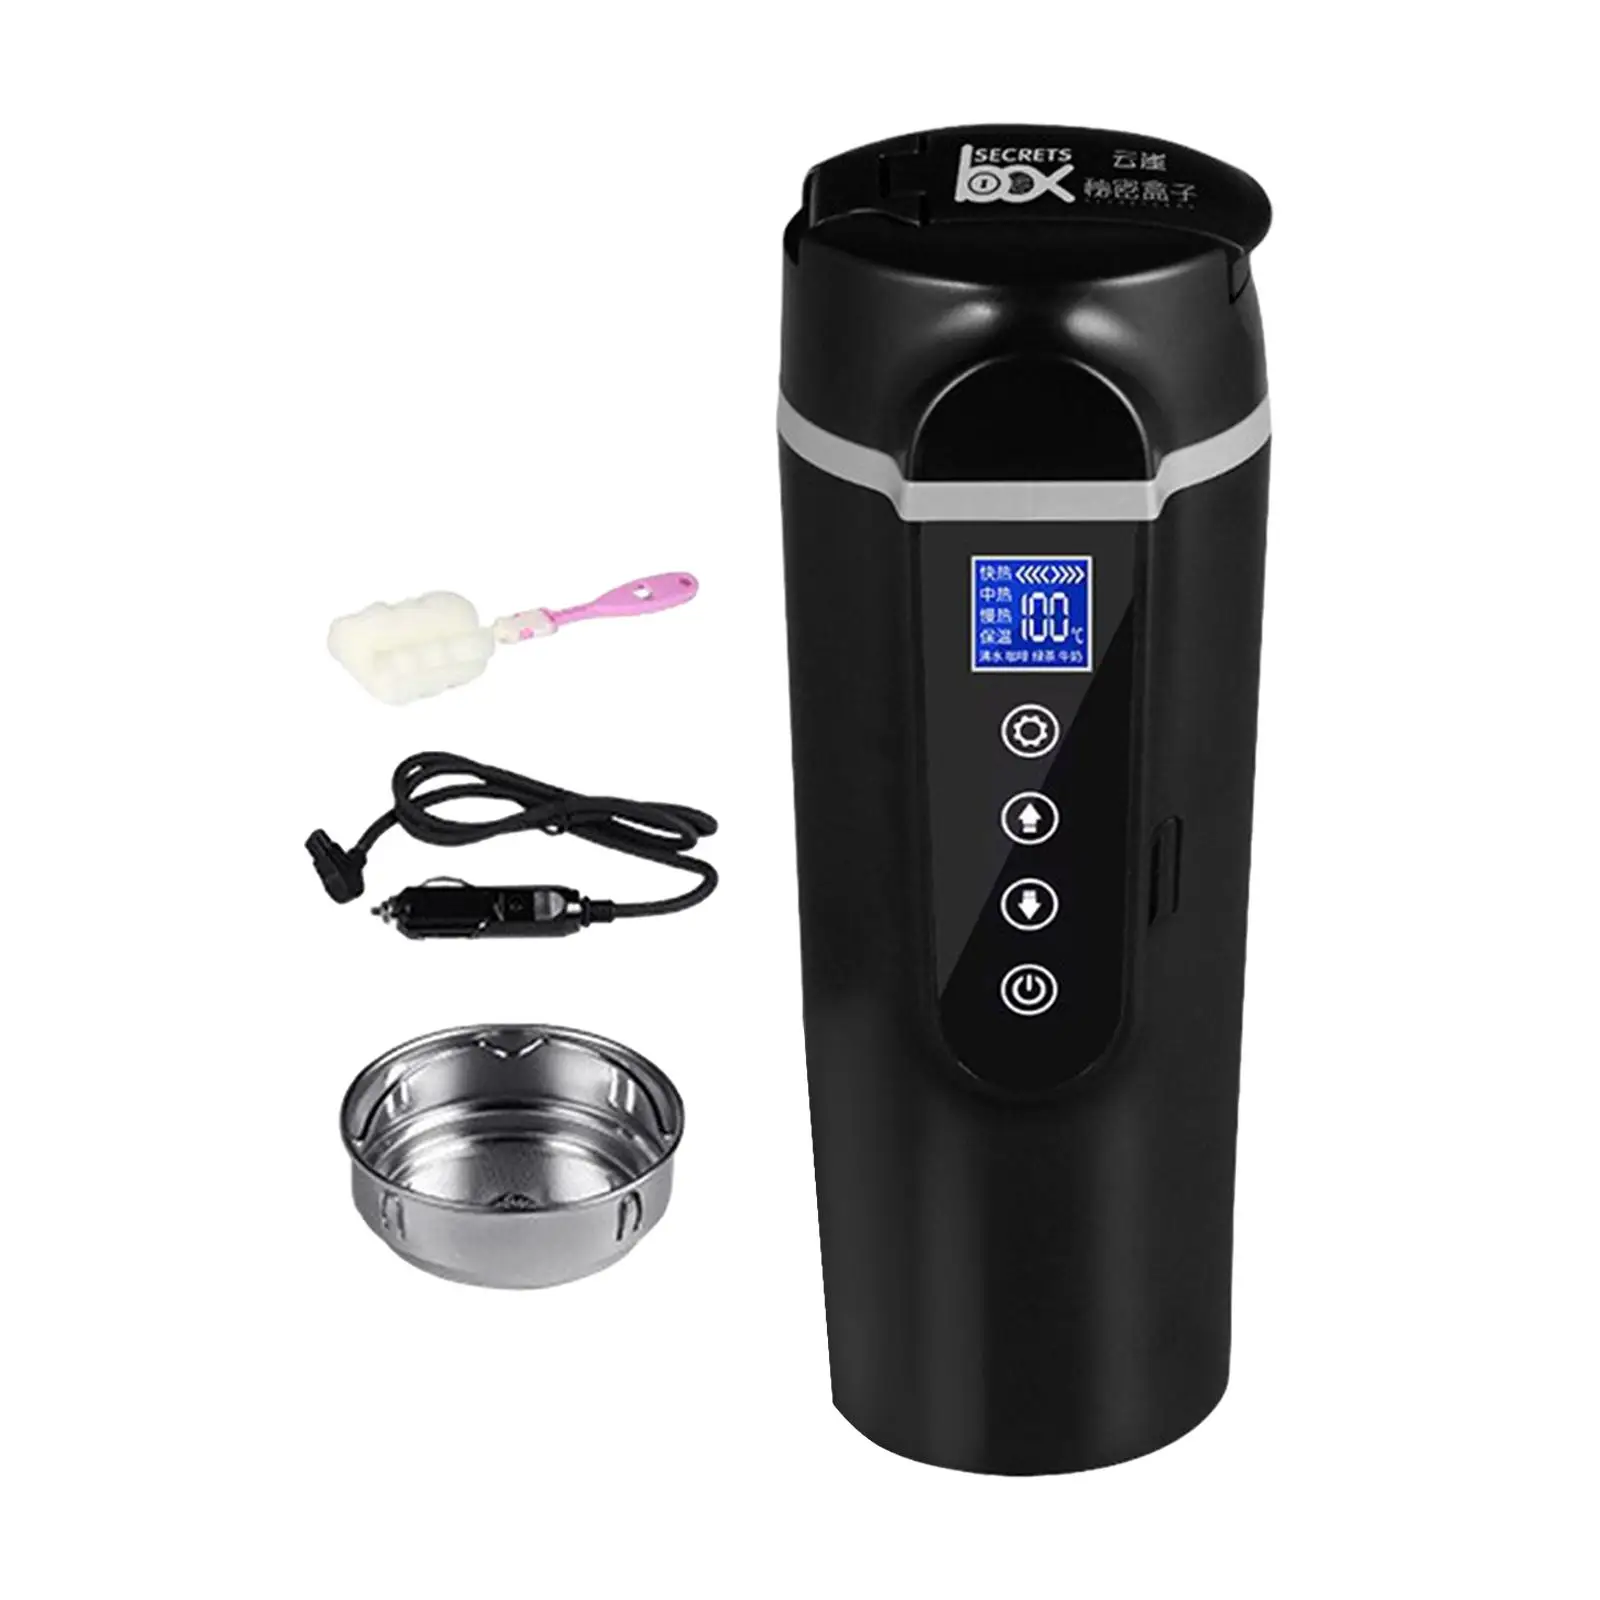 Car Heating Cup 24V/12V Traveling Kettle for Vehicles Trip Tea Water Milk